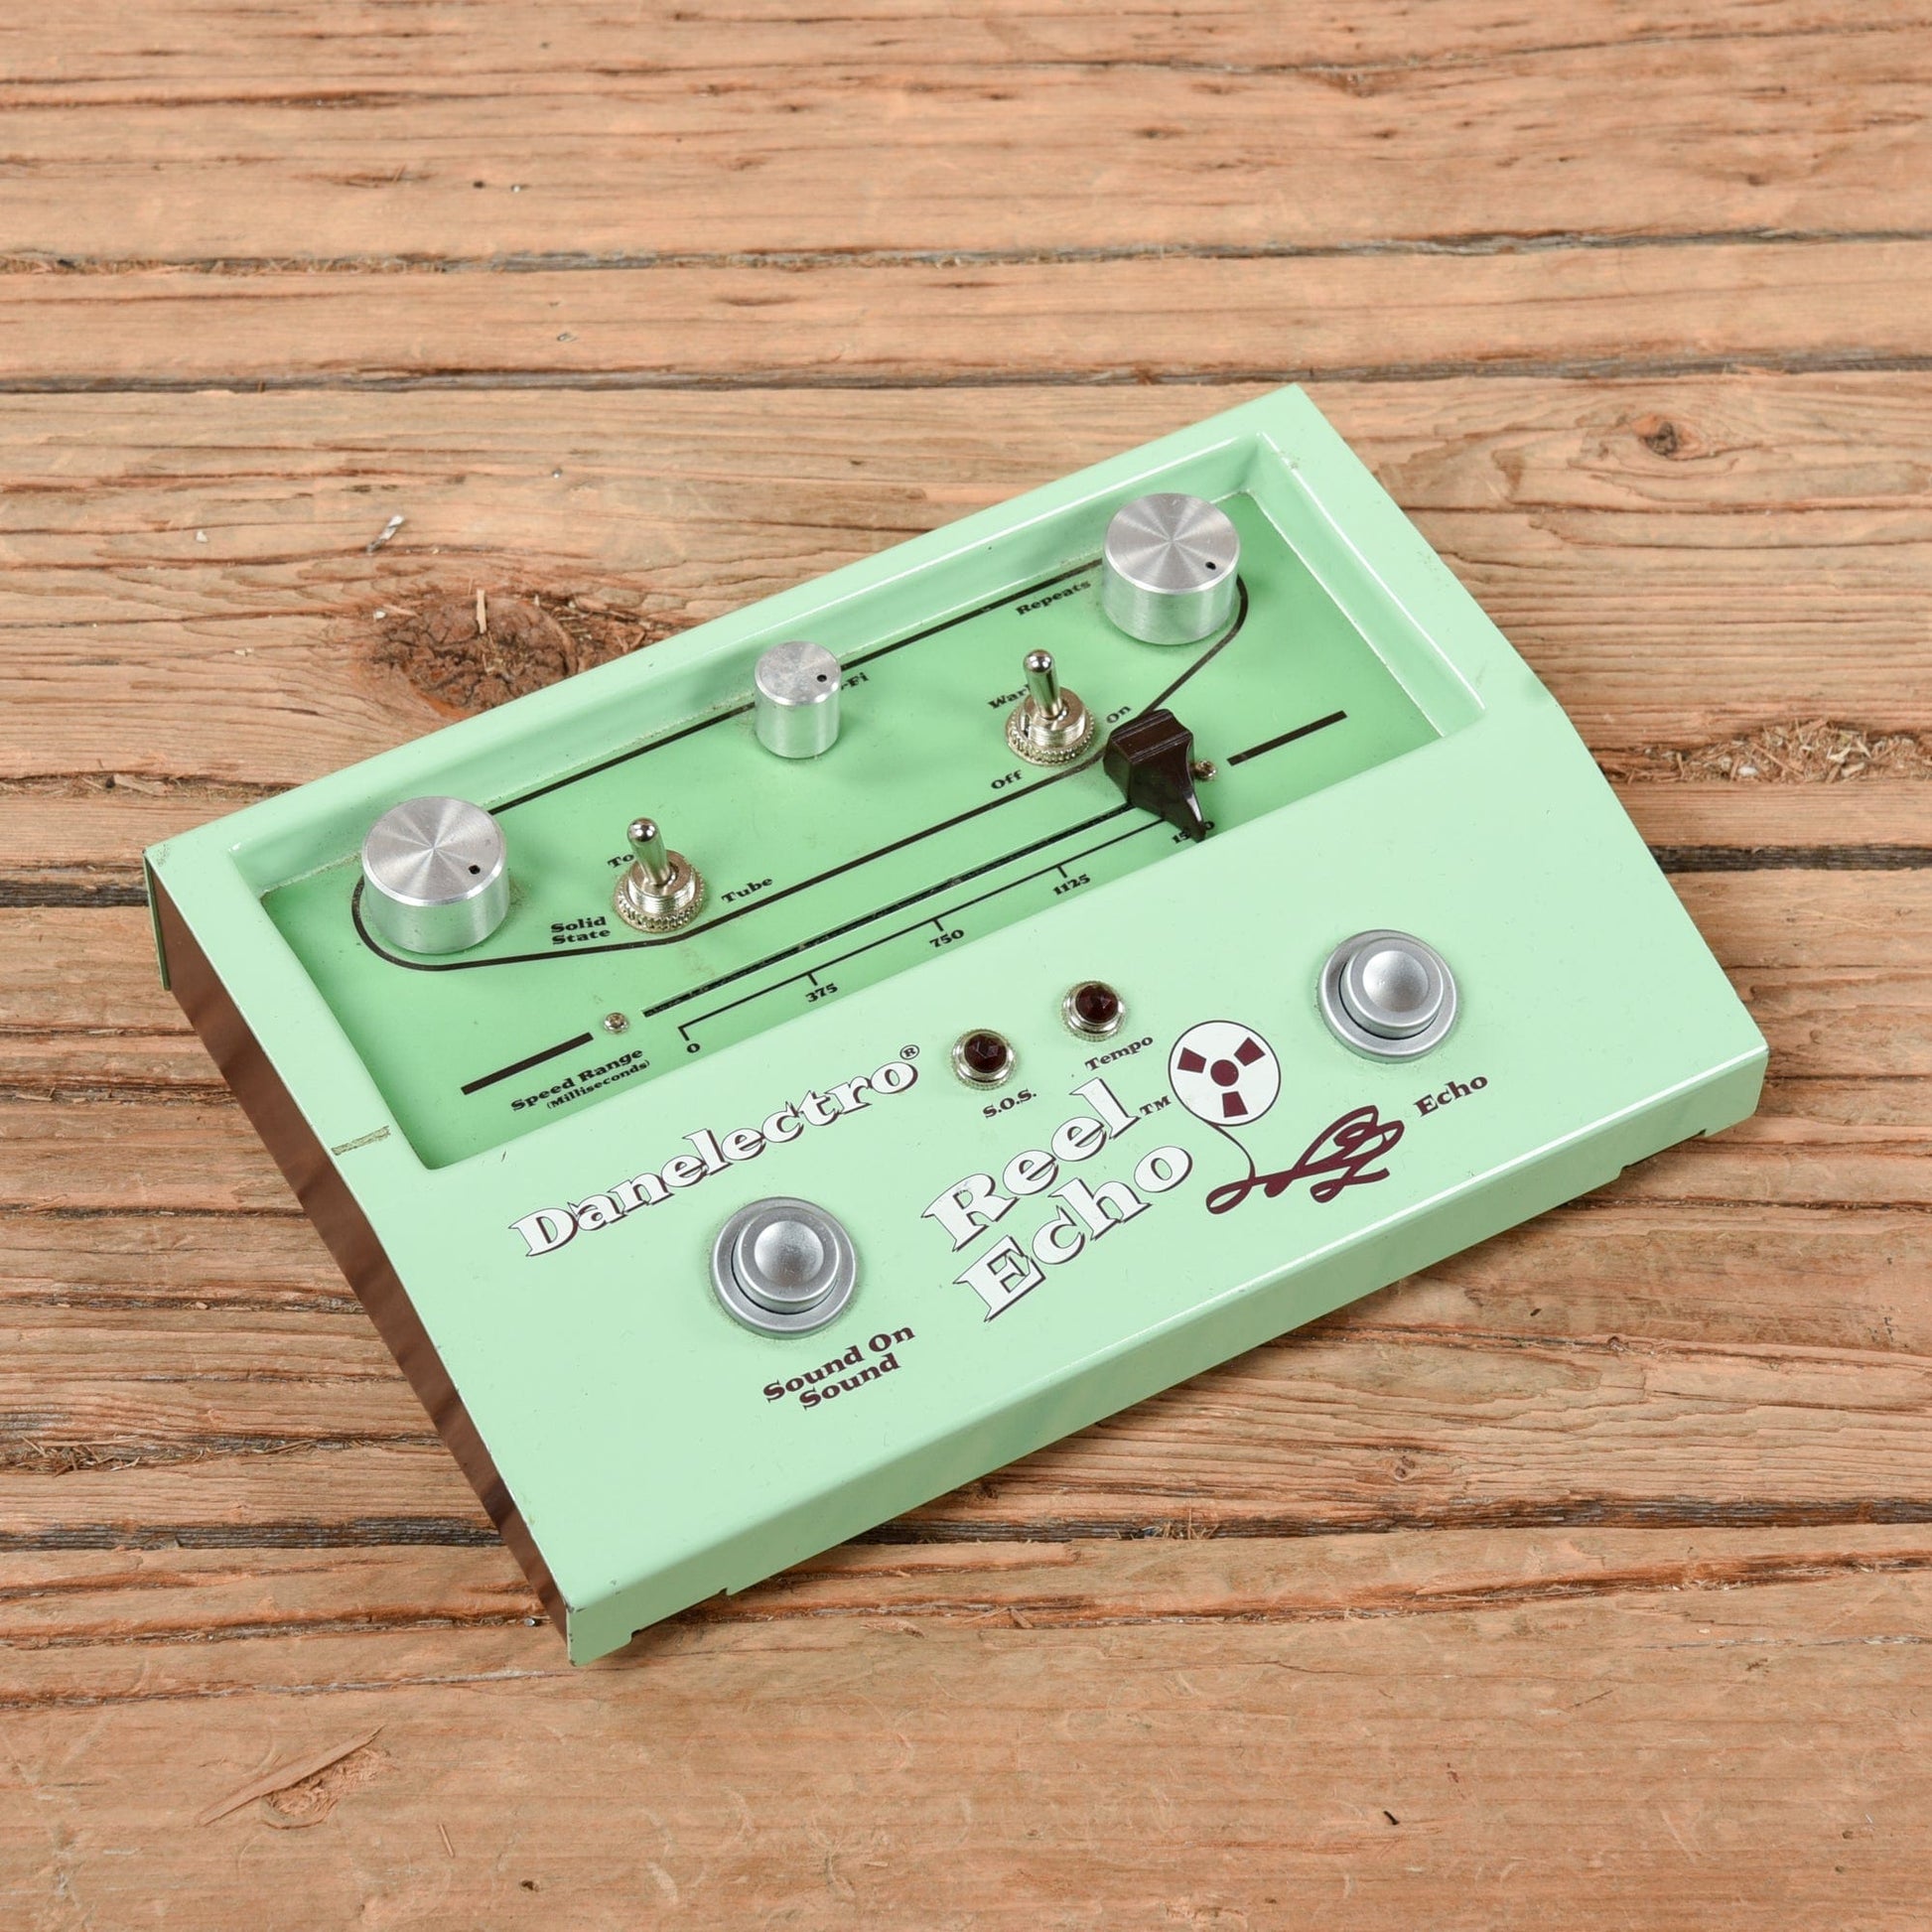 Danelectro DTE-1 Reel Echo Tape Simulator Pedal Effects and Pedals / Delay